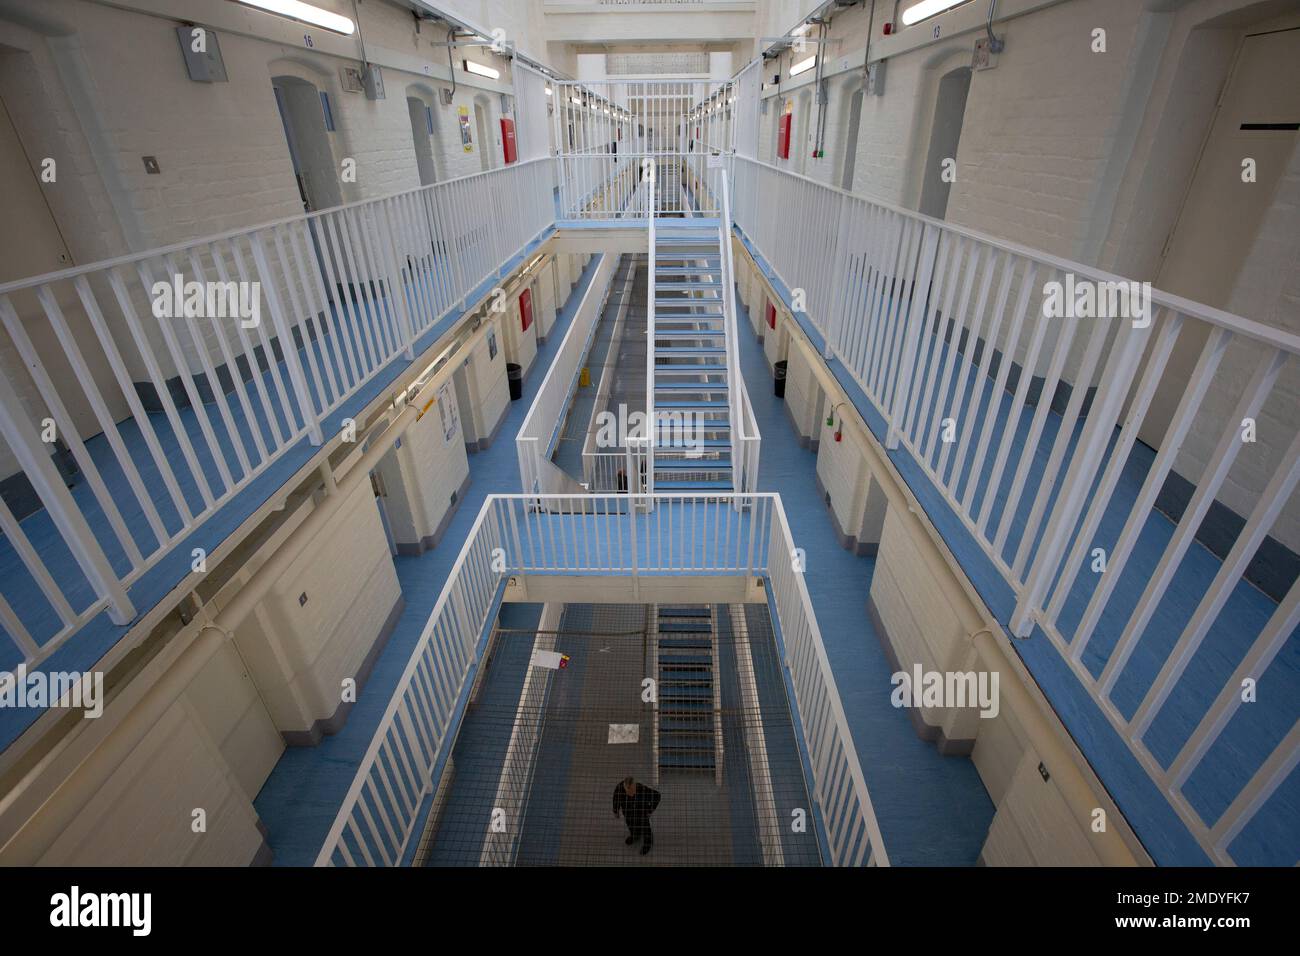 The B Wing facility for newly-arrived prisoners at HMP Liverpool, also known as Walton Prison. The prison was given a scathing report in 2017 which pointed out various failings and problems. Present governor Pia Sinha was appointed in that year and in the next two years she turned the prison around with a programme of improvements and support for inmates and infrastructure. HMP Liverpool houses a maximum of 700 prisoners with an overall staff of around 250. Stock Photo